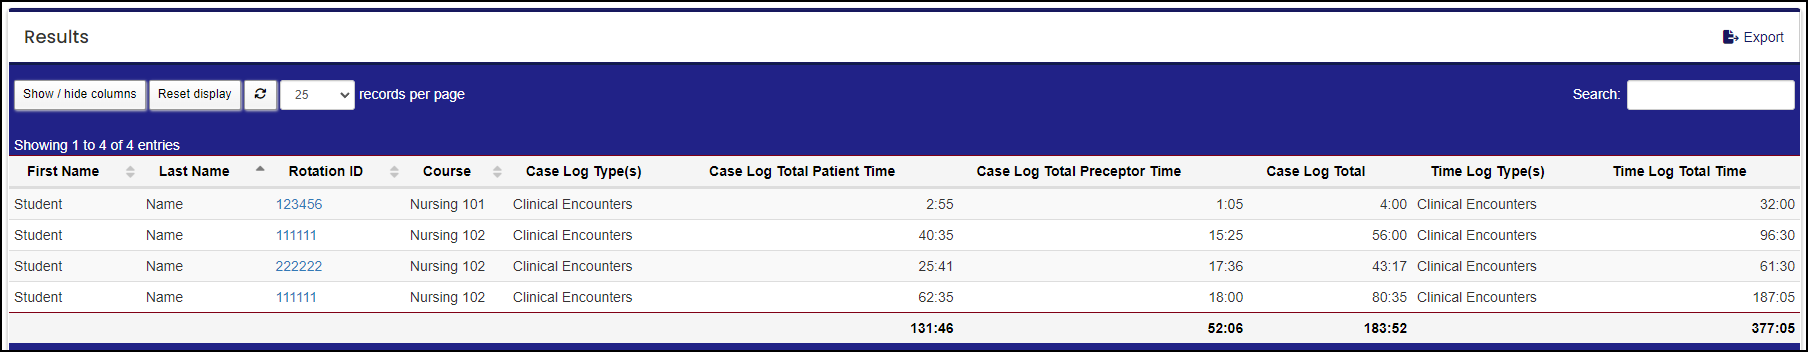 Case and time log hours results table displaying first and last name, rotation ID, course, case log types, case log total patient time, case log total preceptor time, case log total time, time log types, and time log total time.